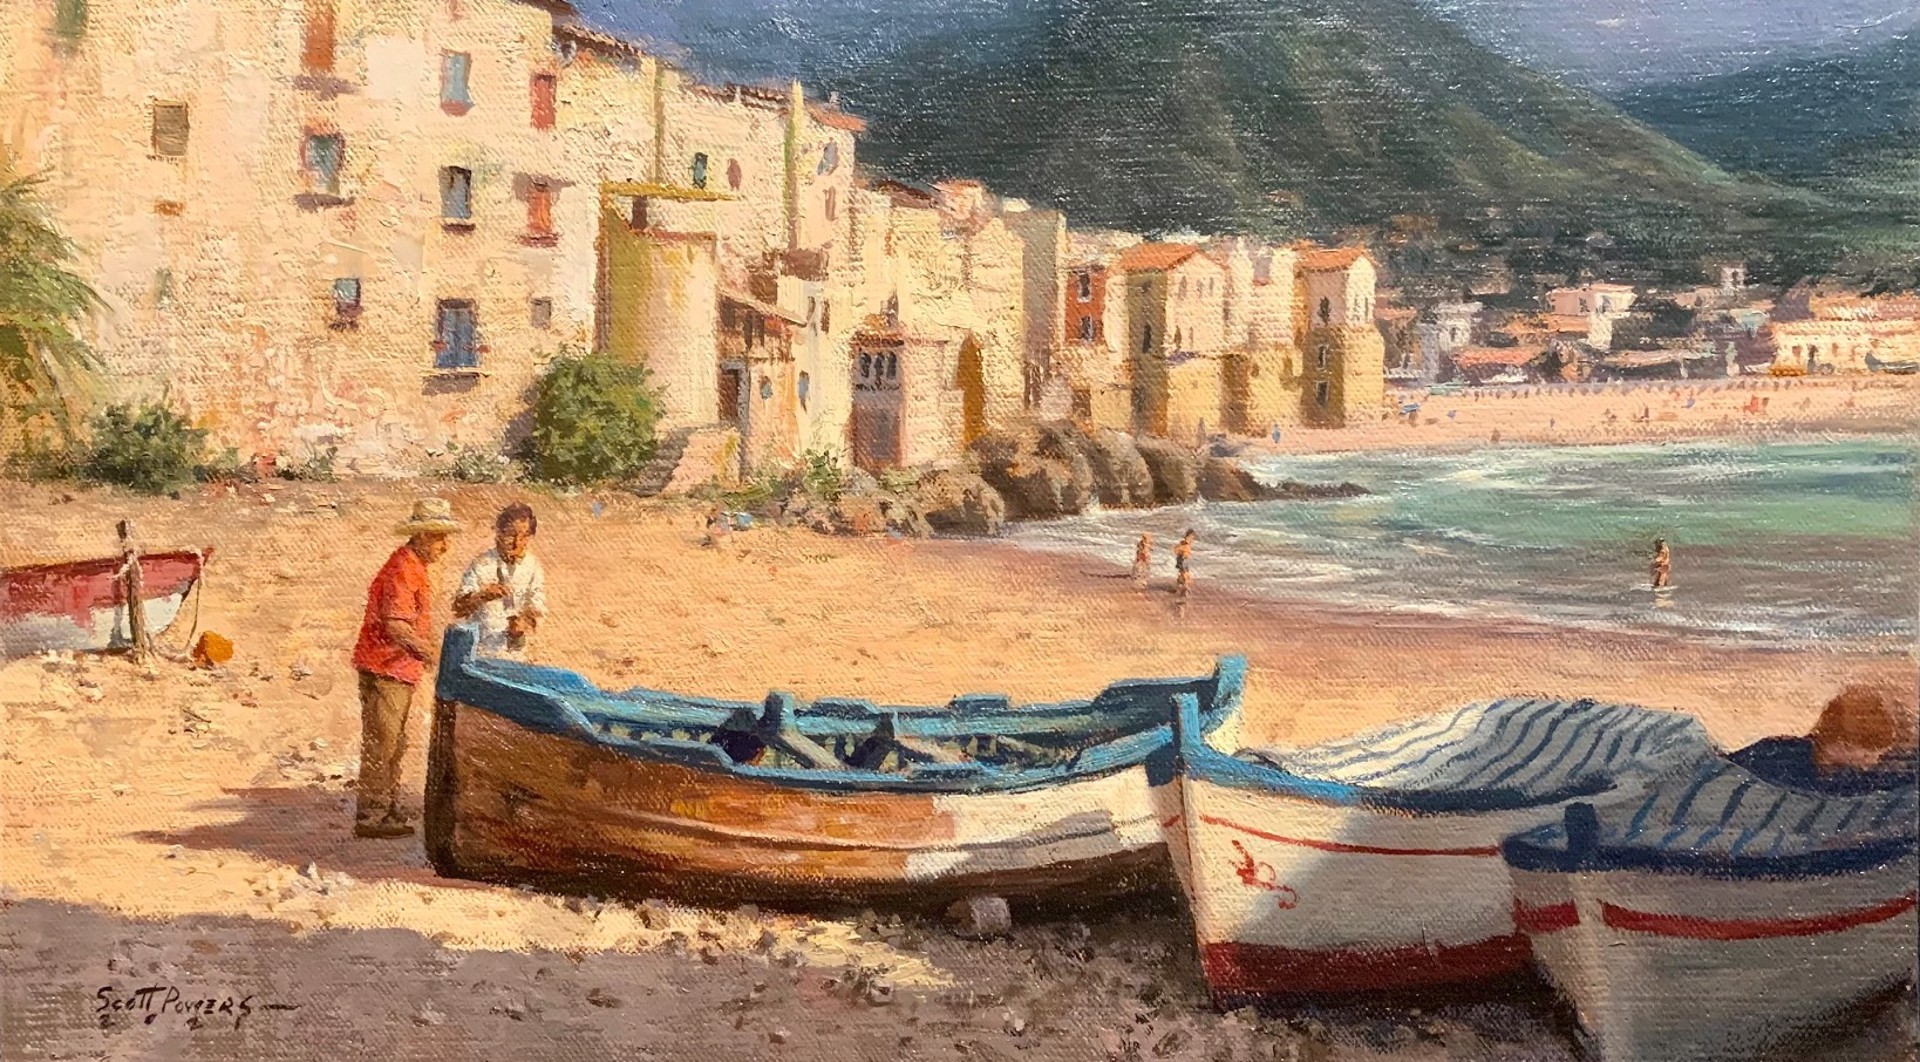 Painting Boats in Cefalú, Sicily by Scott Tallman Powers